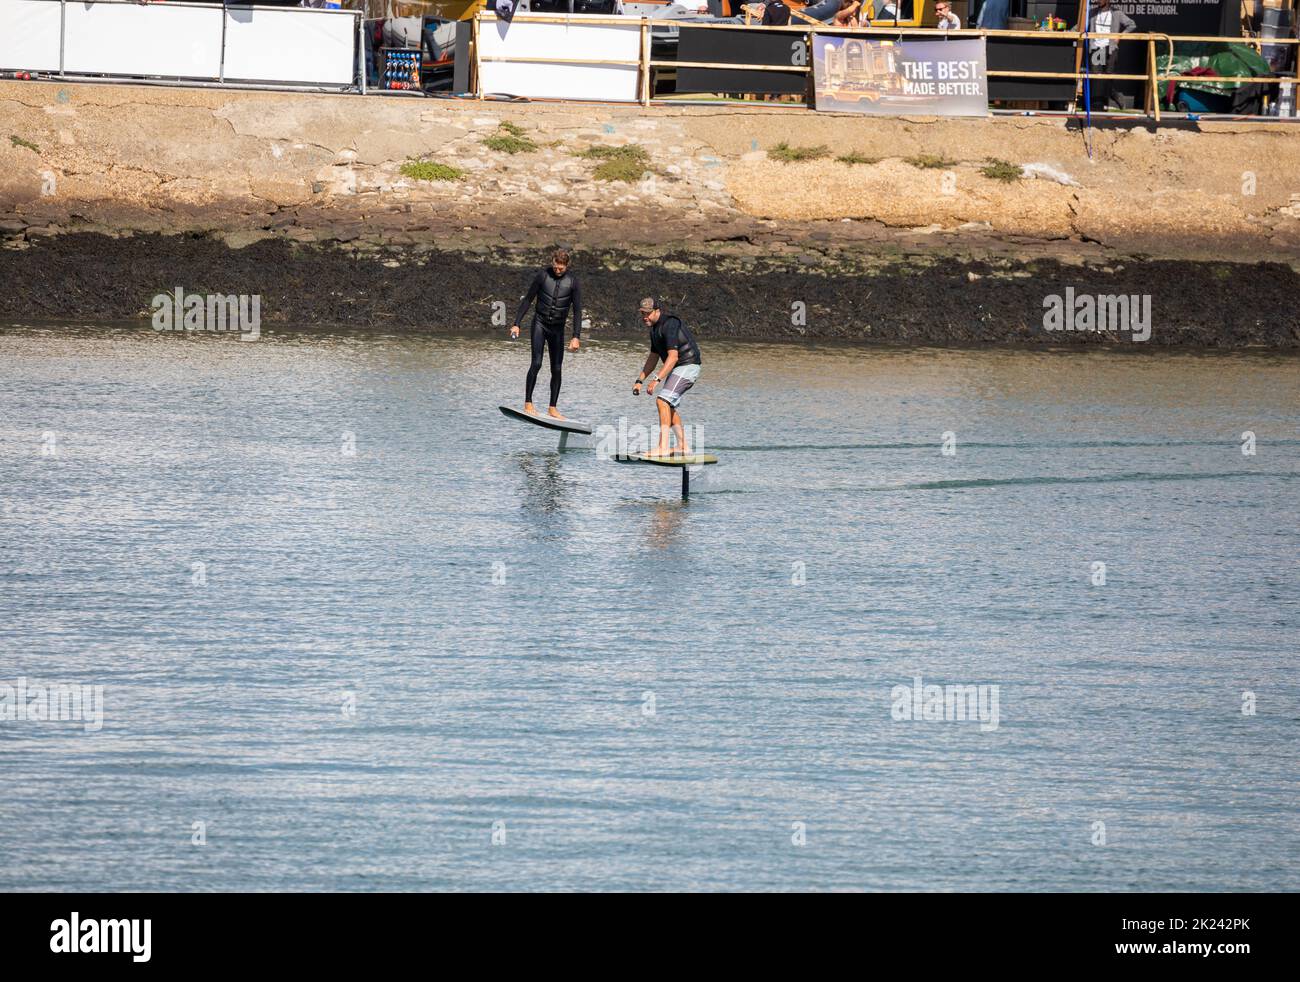 eFoil surfing at the Southampton boat show in Southampton, UK Stock Photo